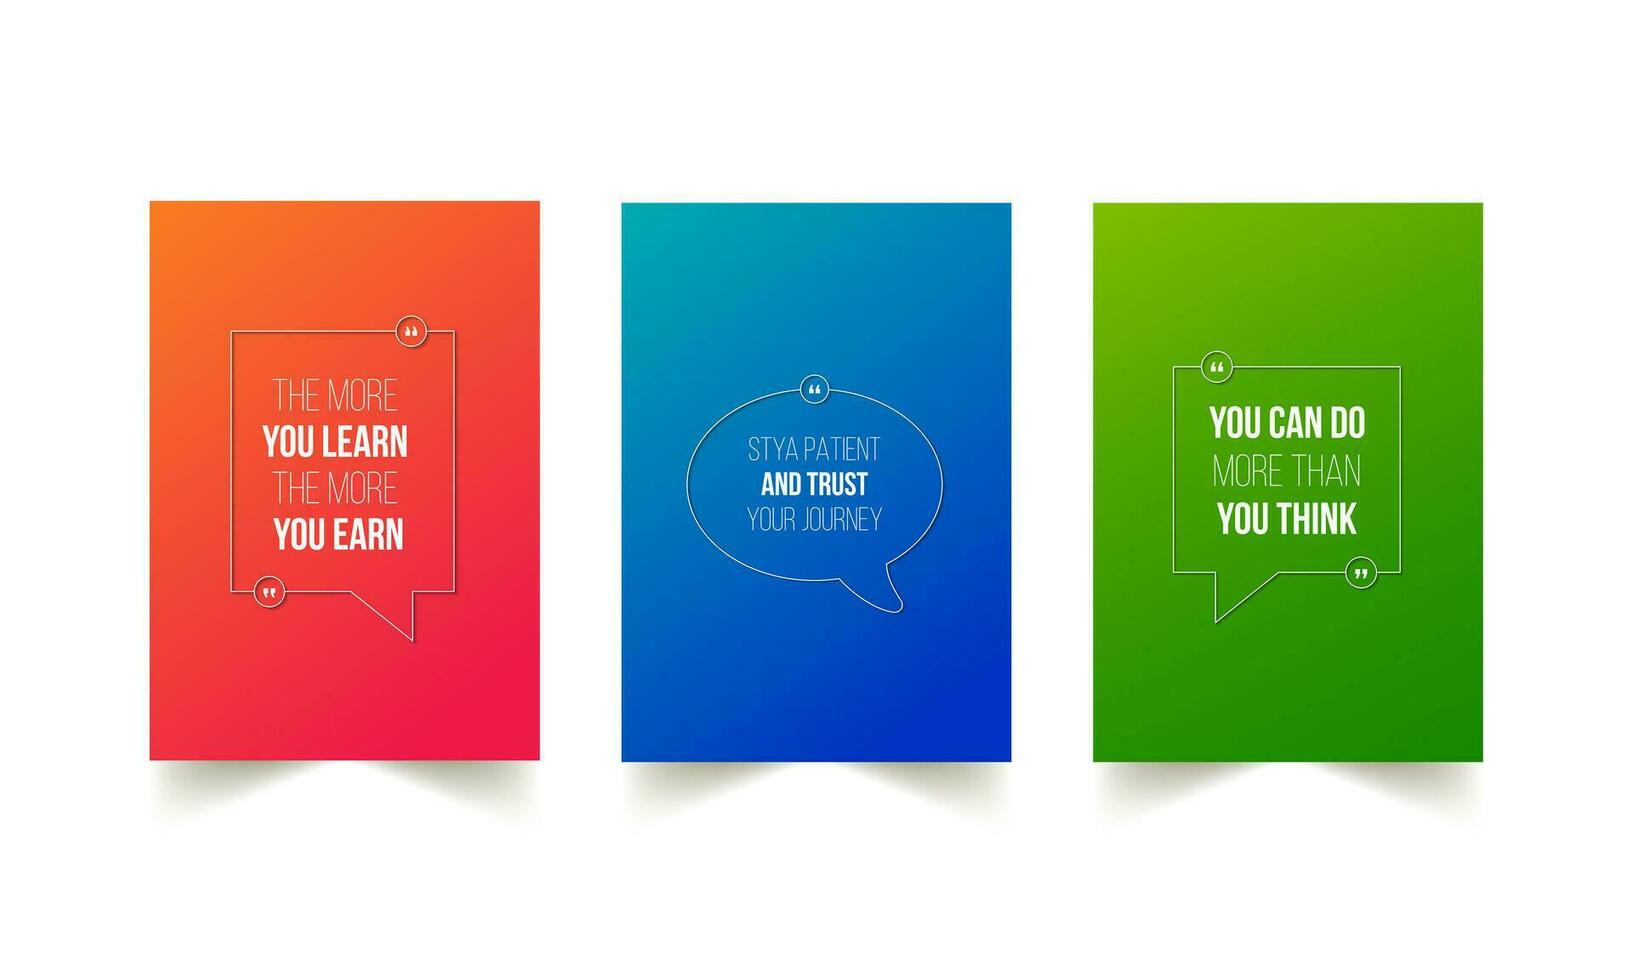 You can do more than you think motivational quotes banner set vector